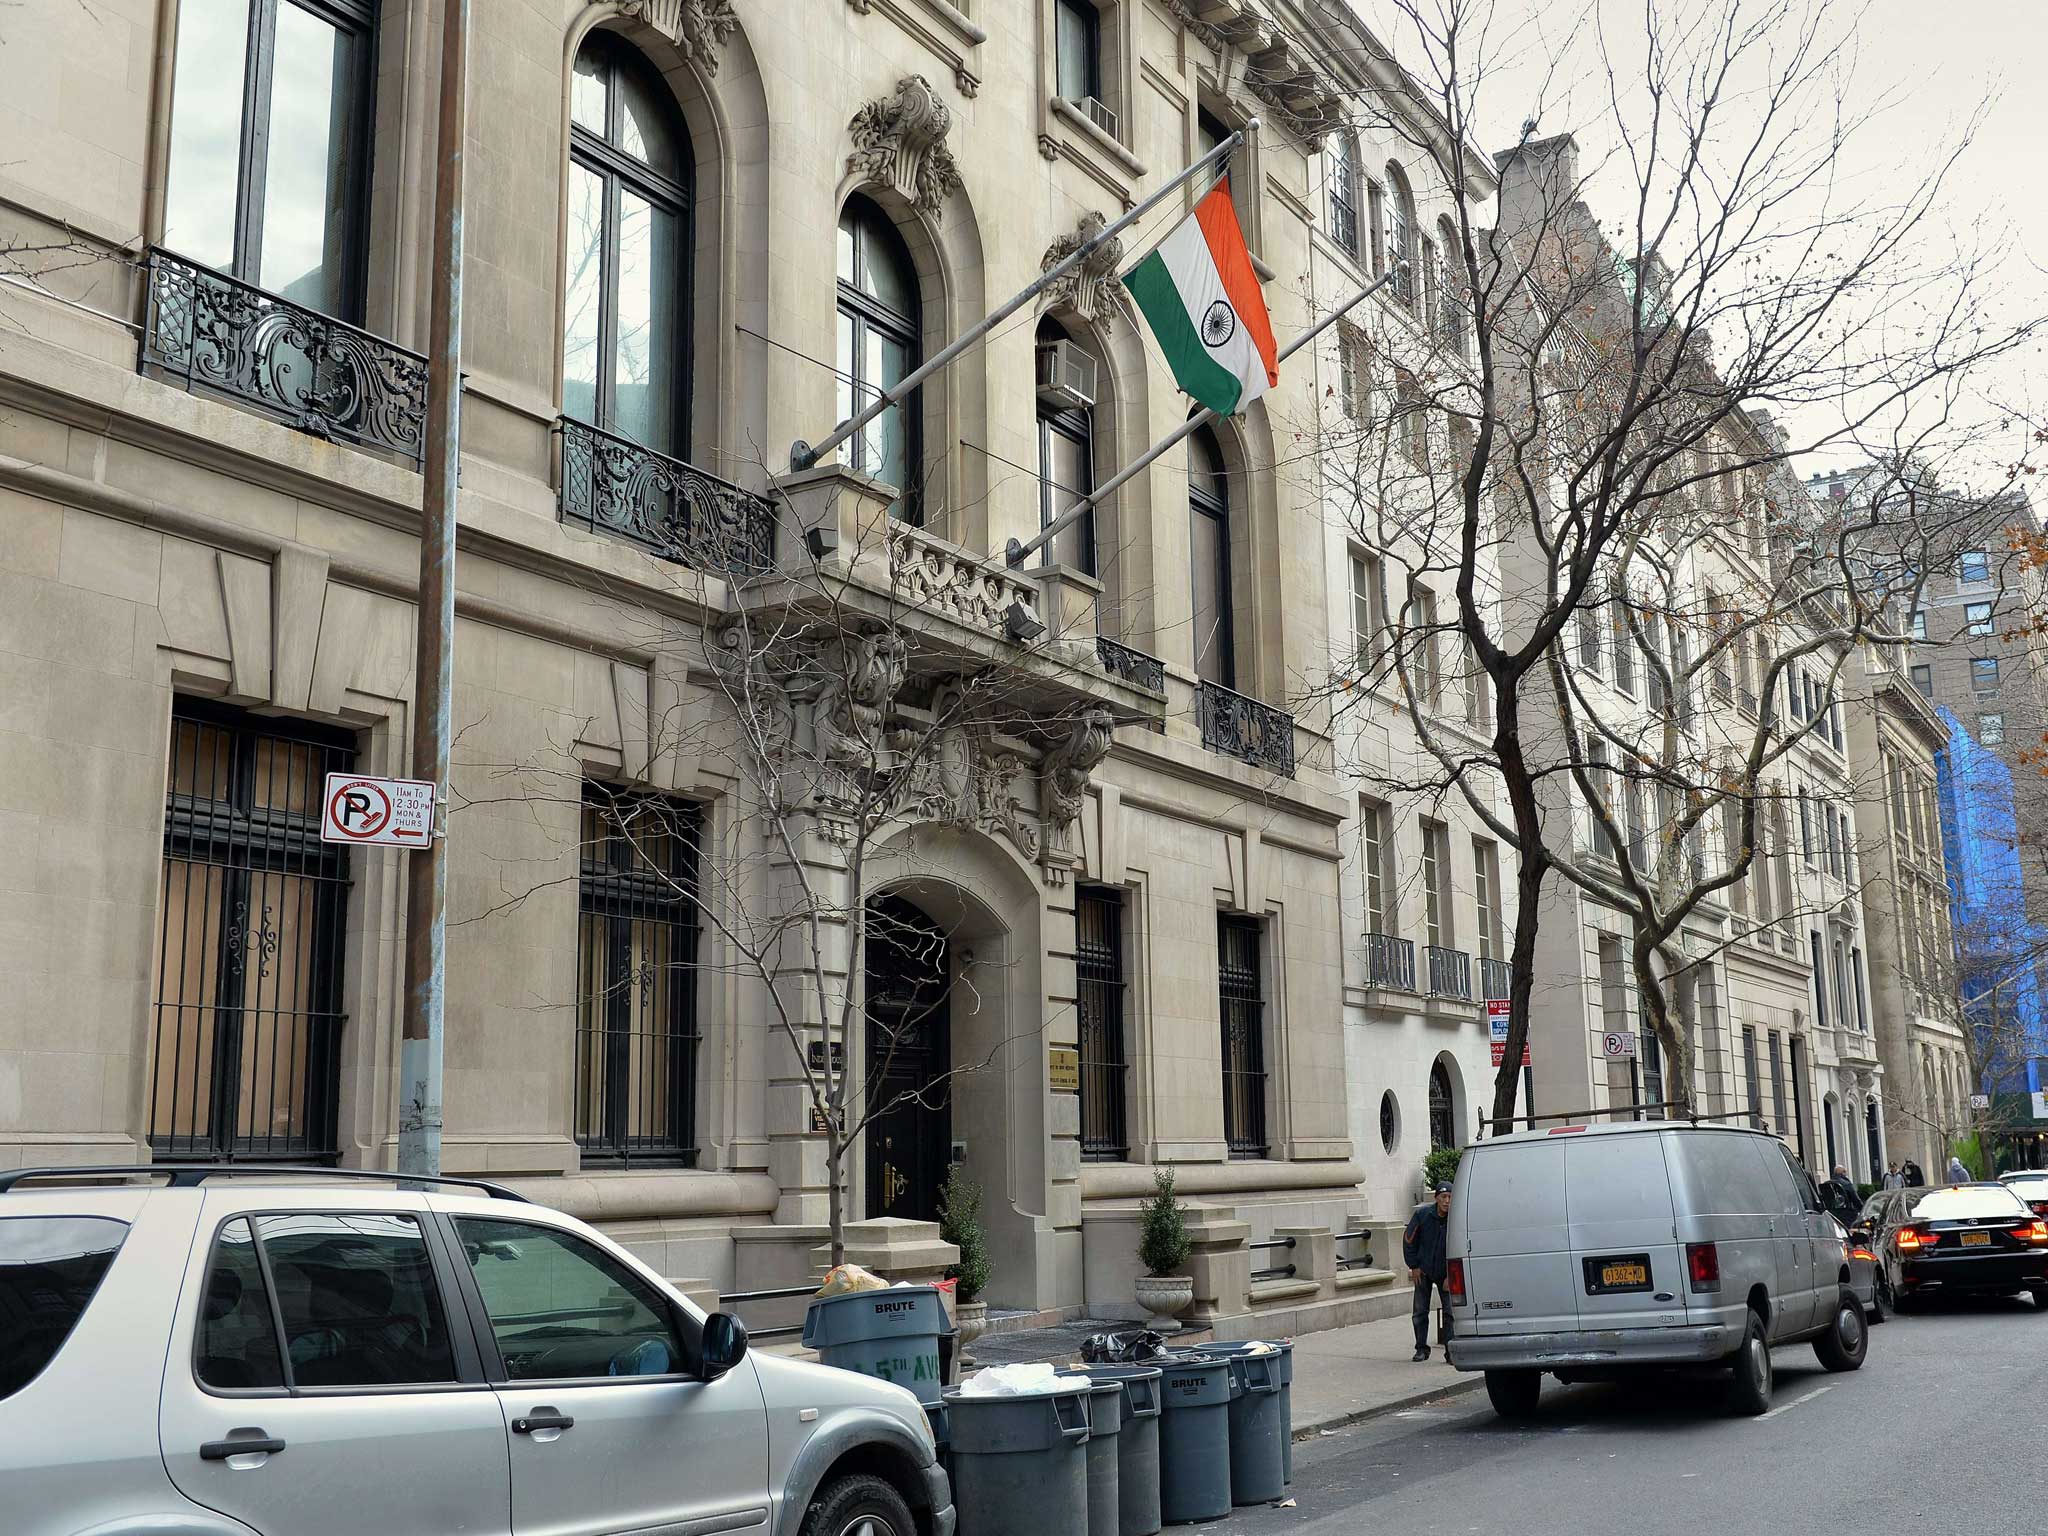 The Consulate General of India building in New York